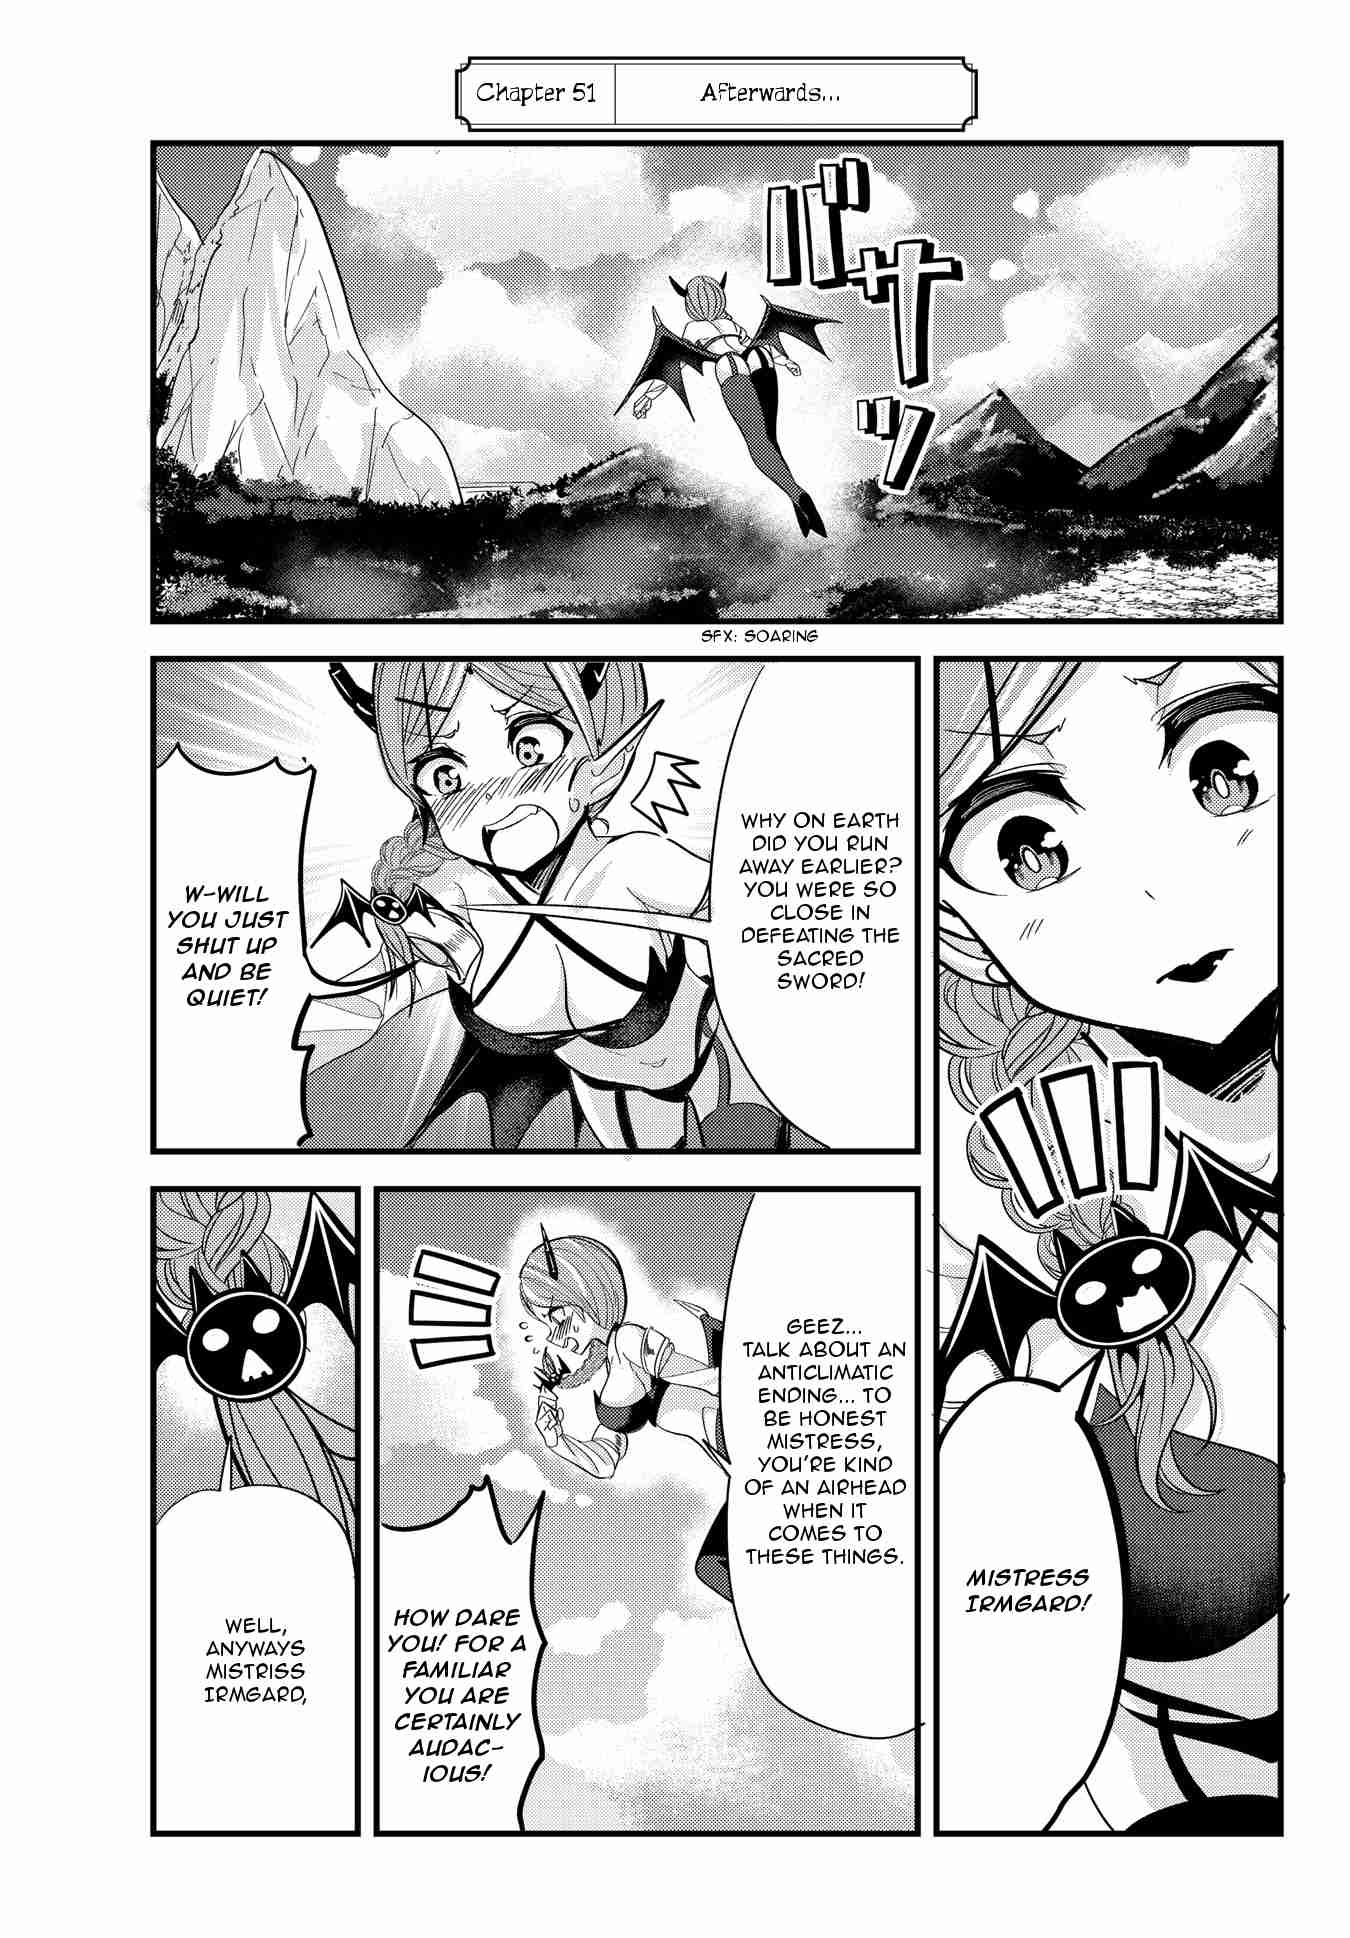 A Story About Treating a Female Knight, Who Has Never Been Treated as a Woman Ch.51